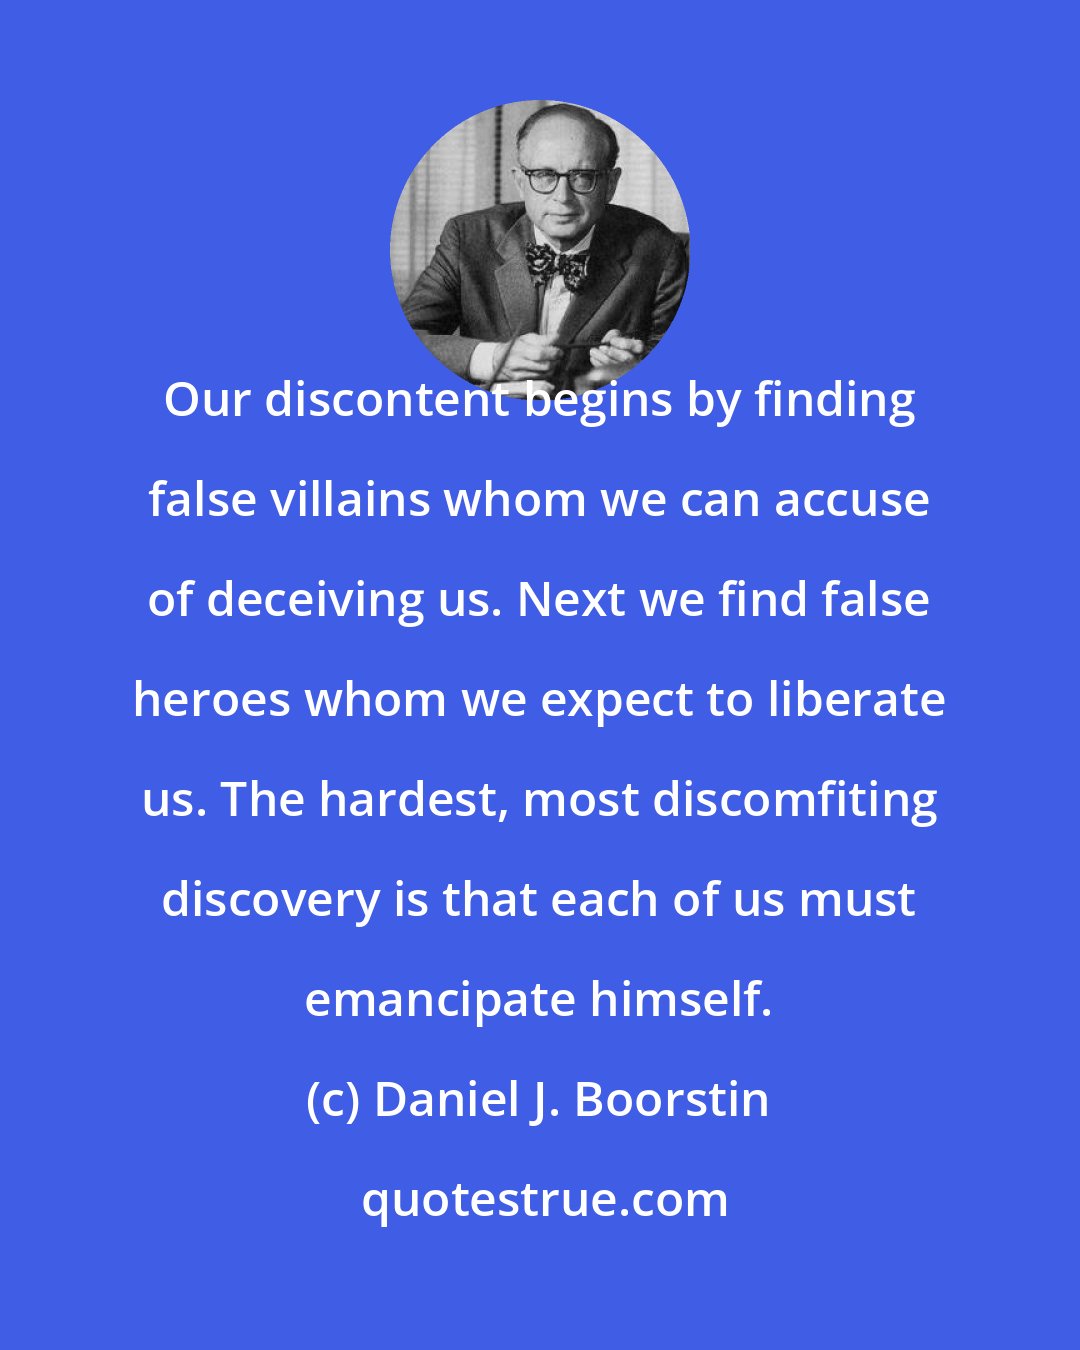 Daniel J. Boorstin: Our discontent begins by finding false villains whom we can accuse of deceiving us. Next we find false heroes whom we expect to liberate us. The hardest, most discomfiting discovery is that each of us must emancipate himself.